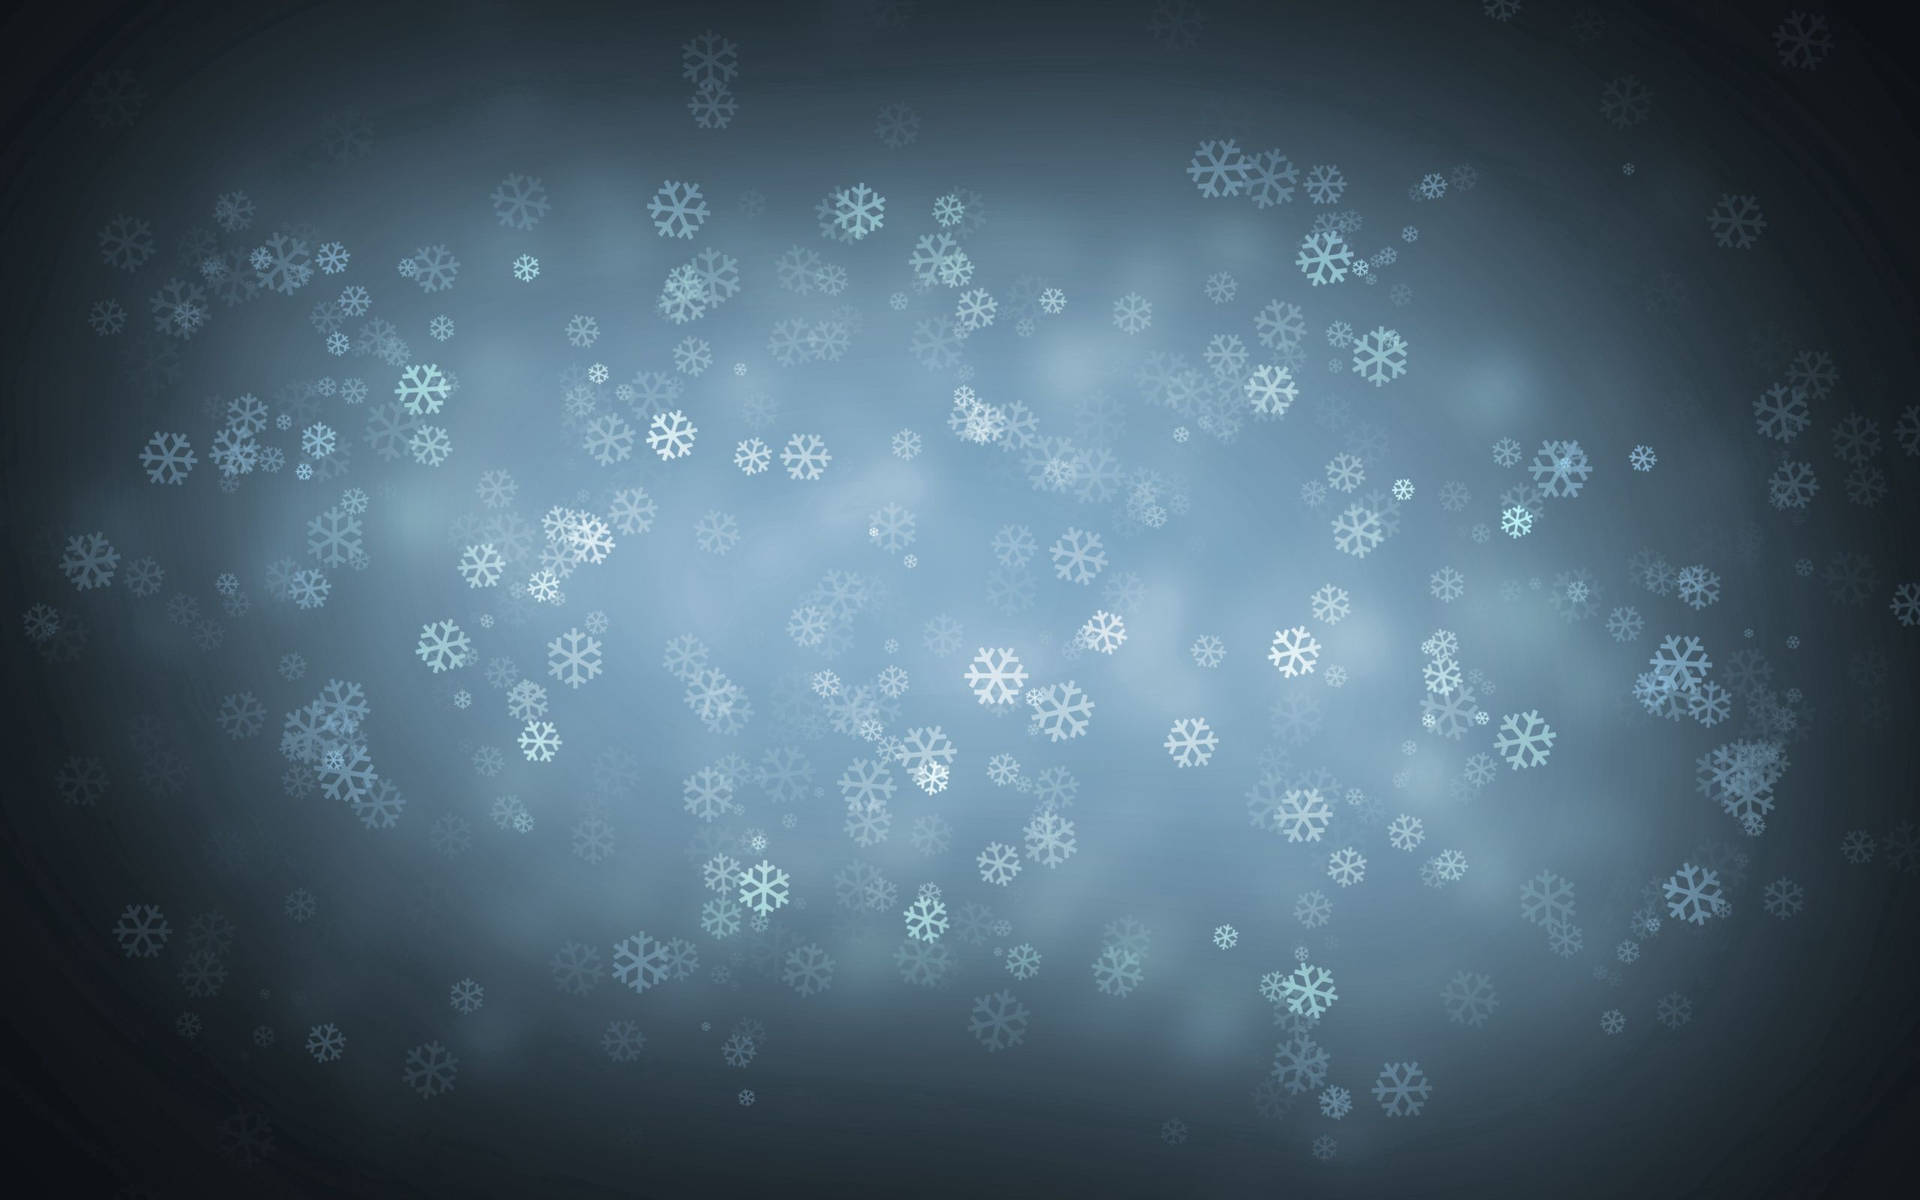 Snowflakes In Vignette Style